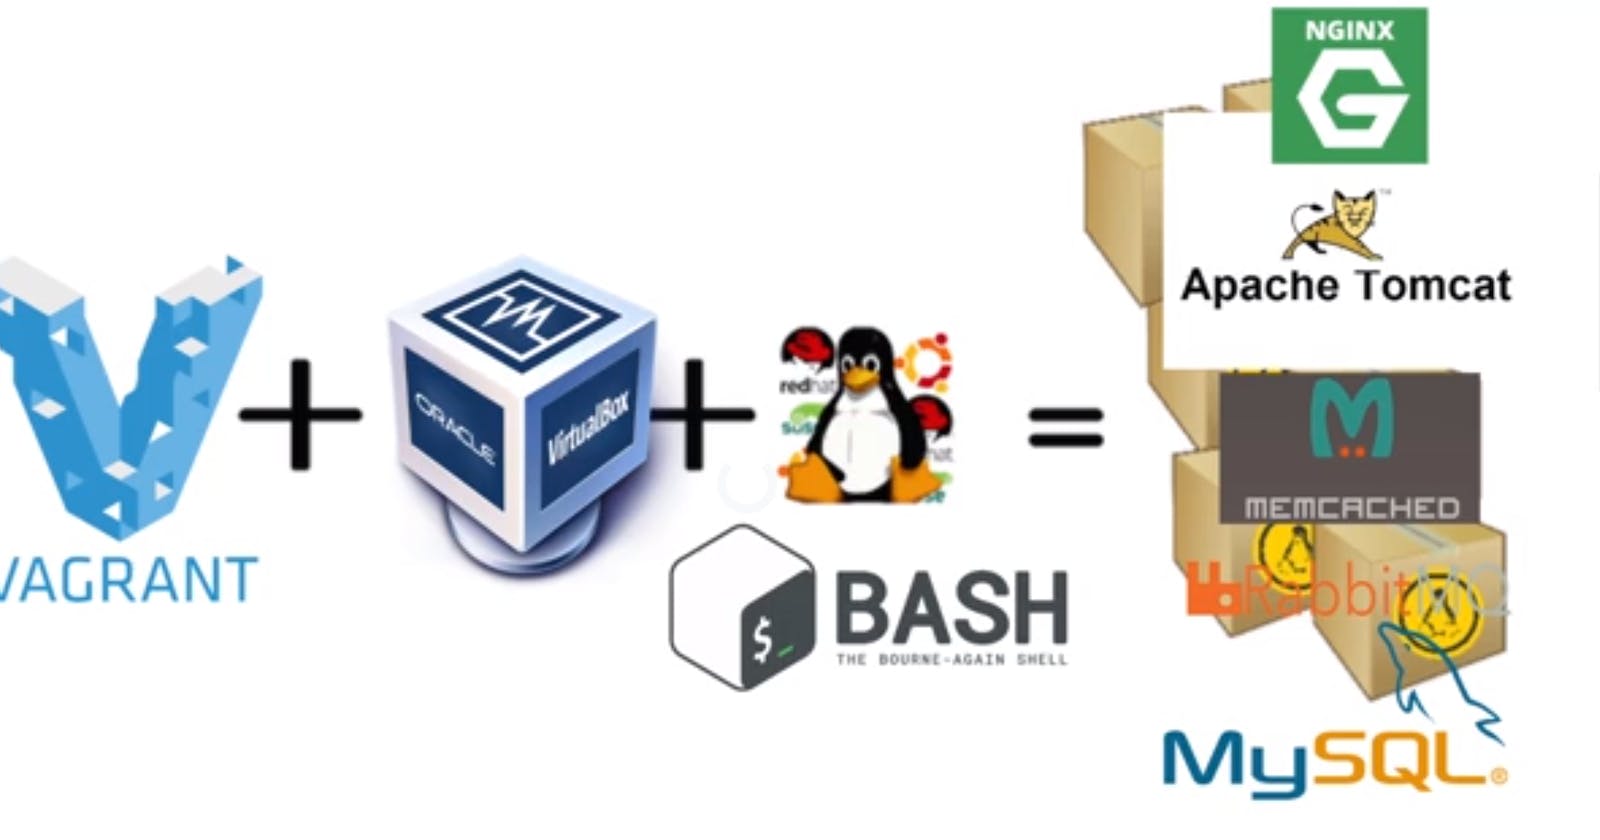 Automated Provisioning of Multi-tier App Deployment